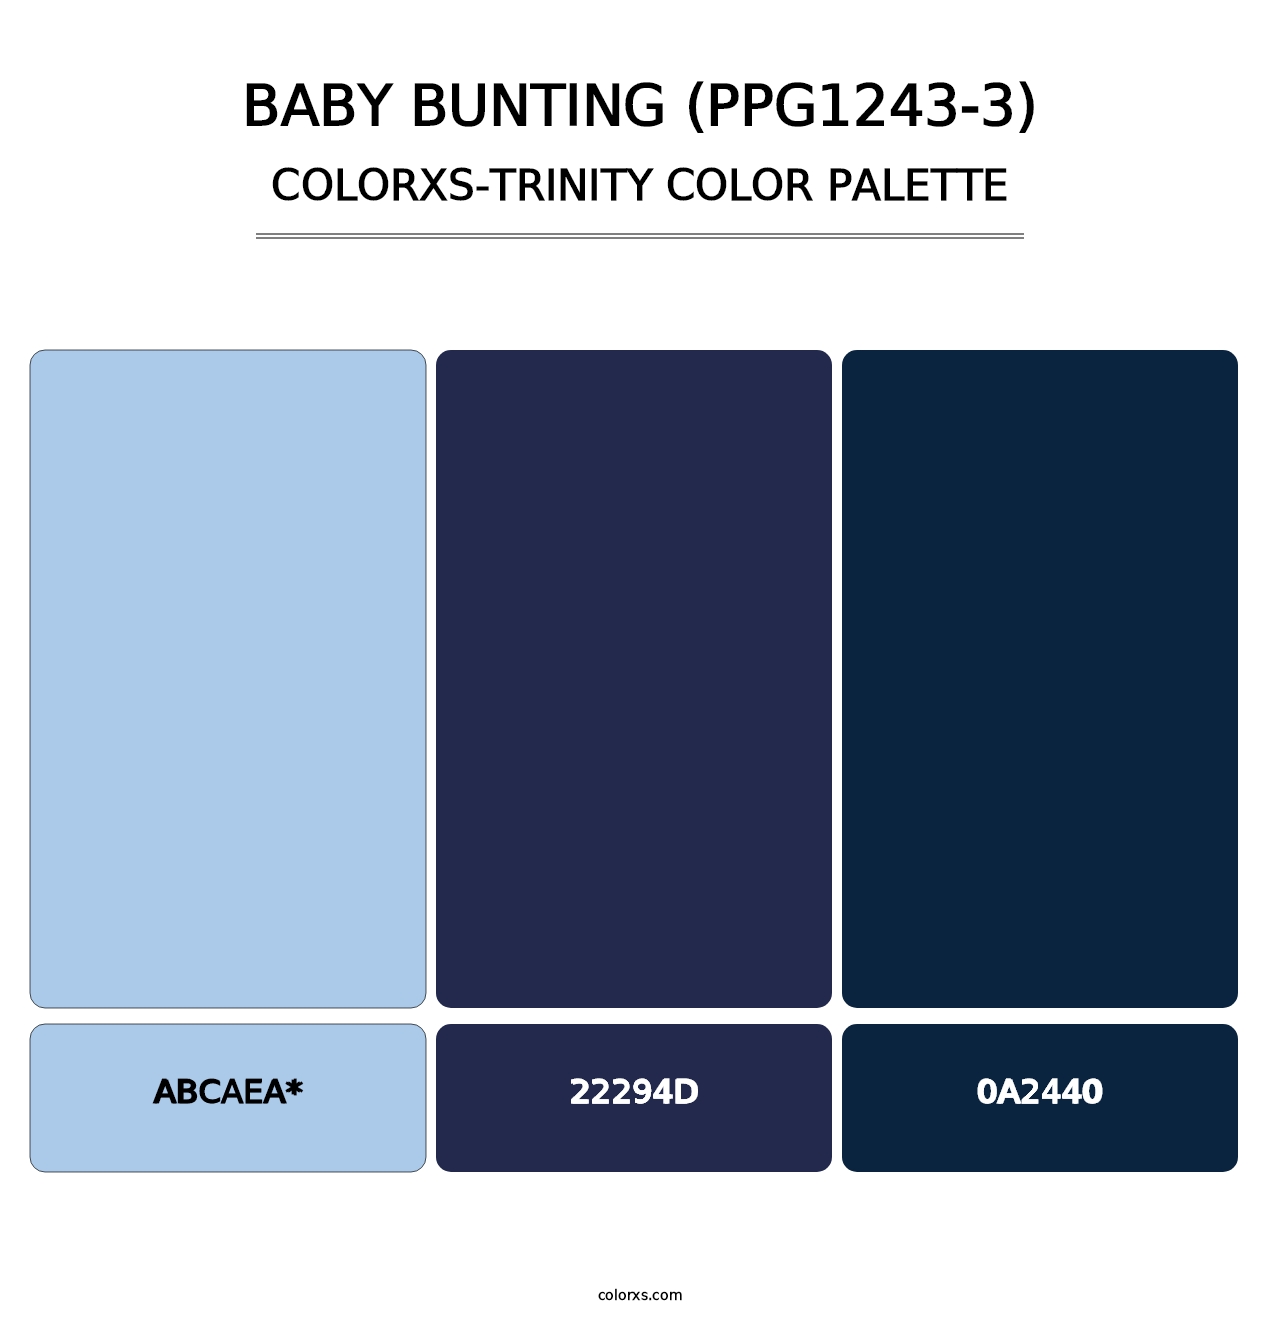 Baby Bunting (PPG1243-3) - Colorxs Trinity Palette